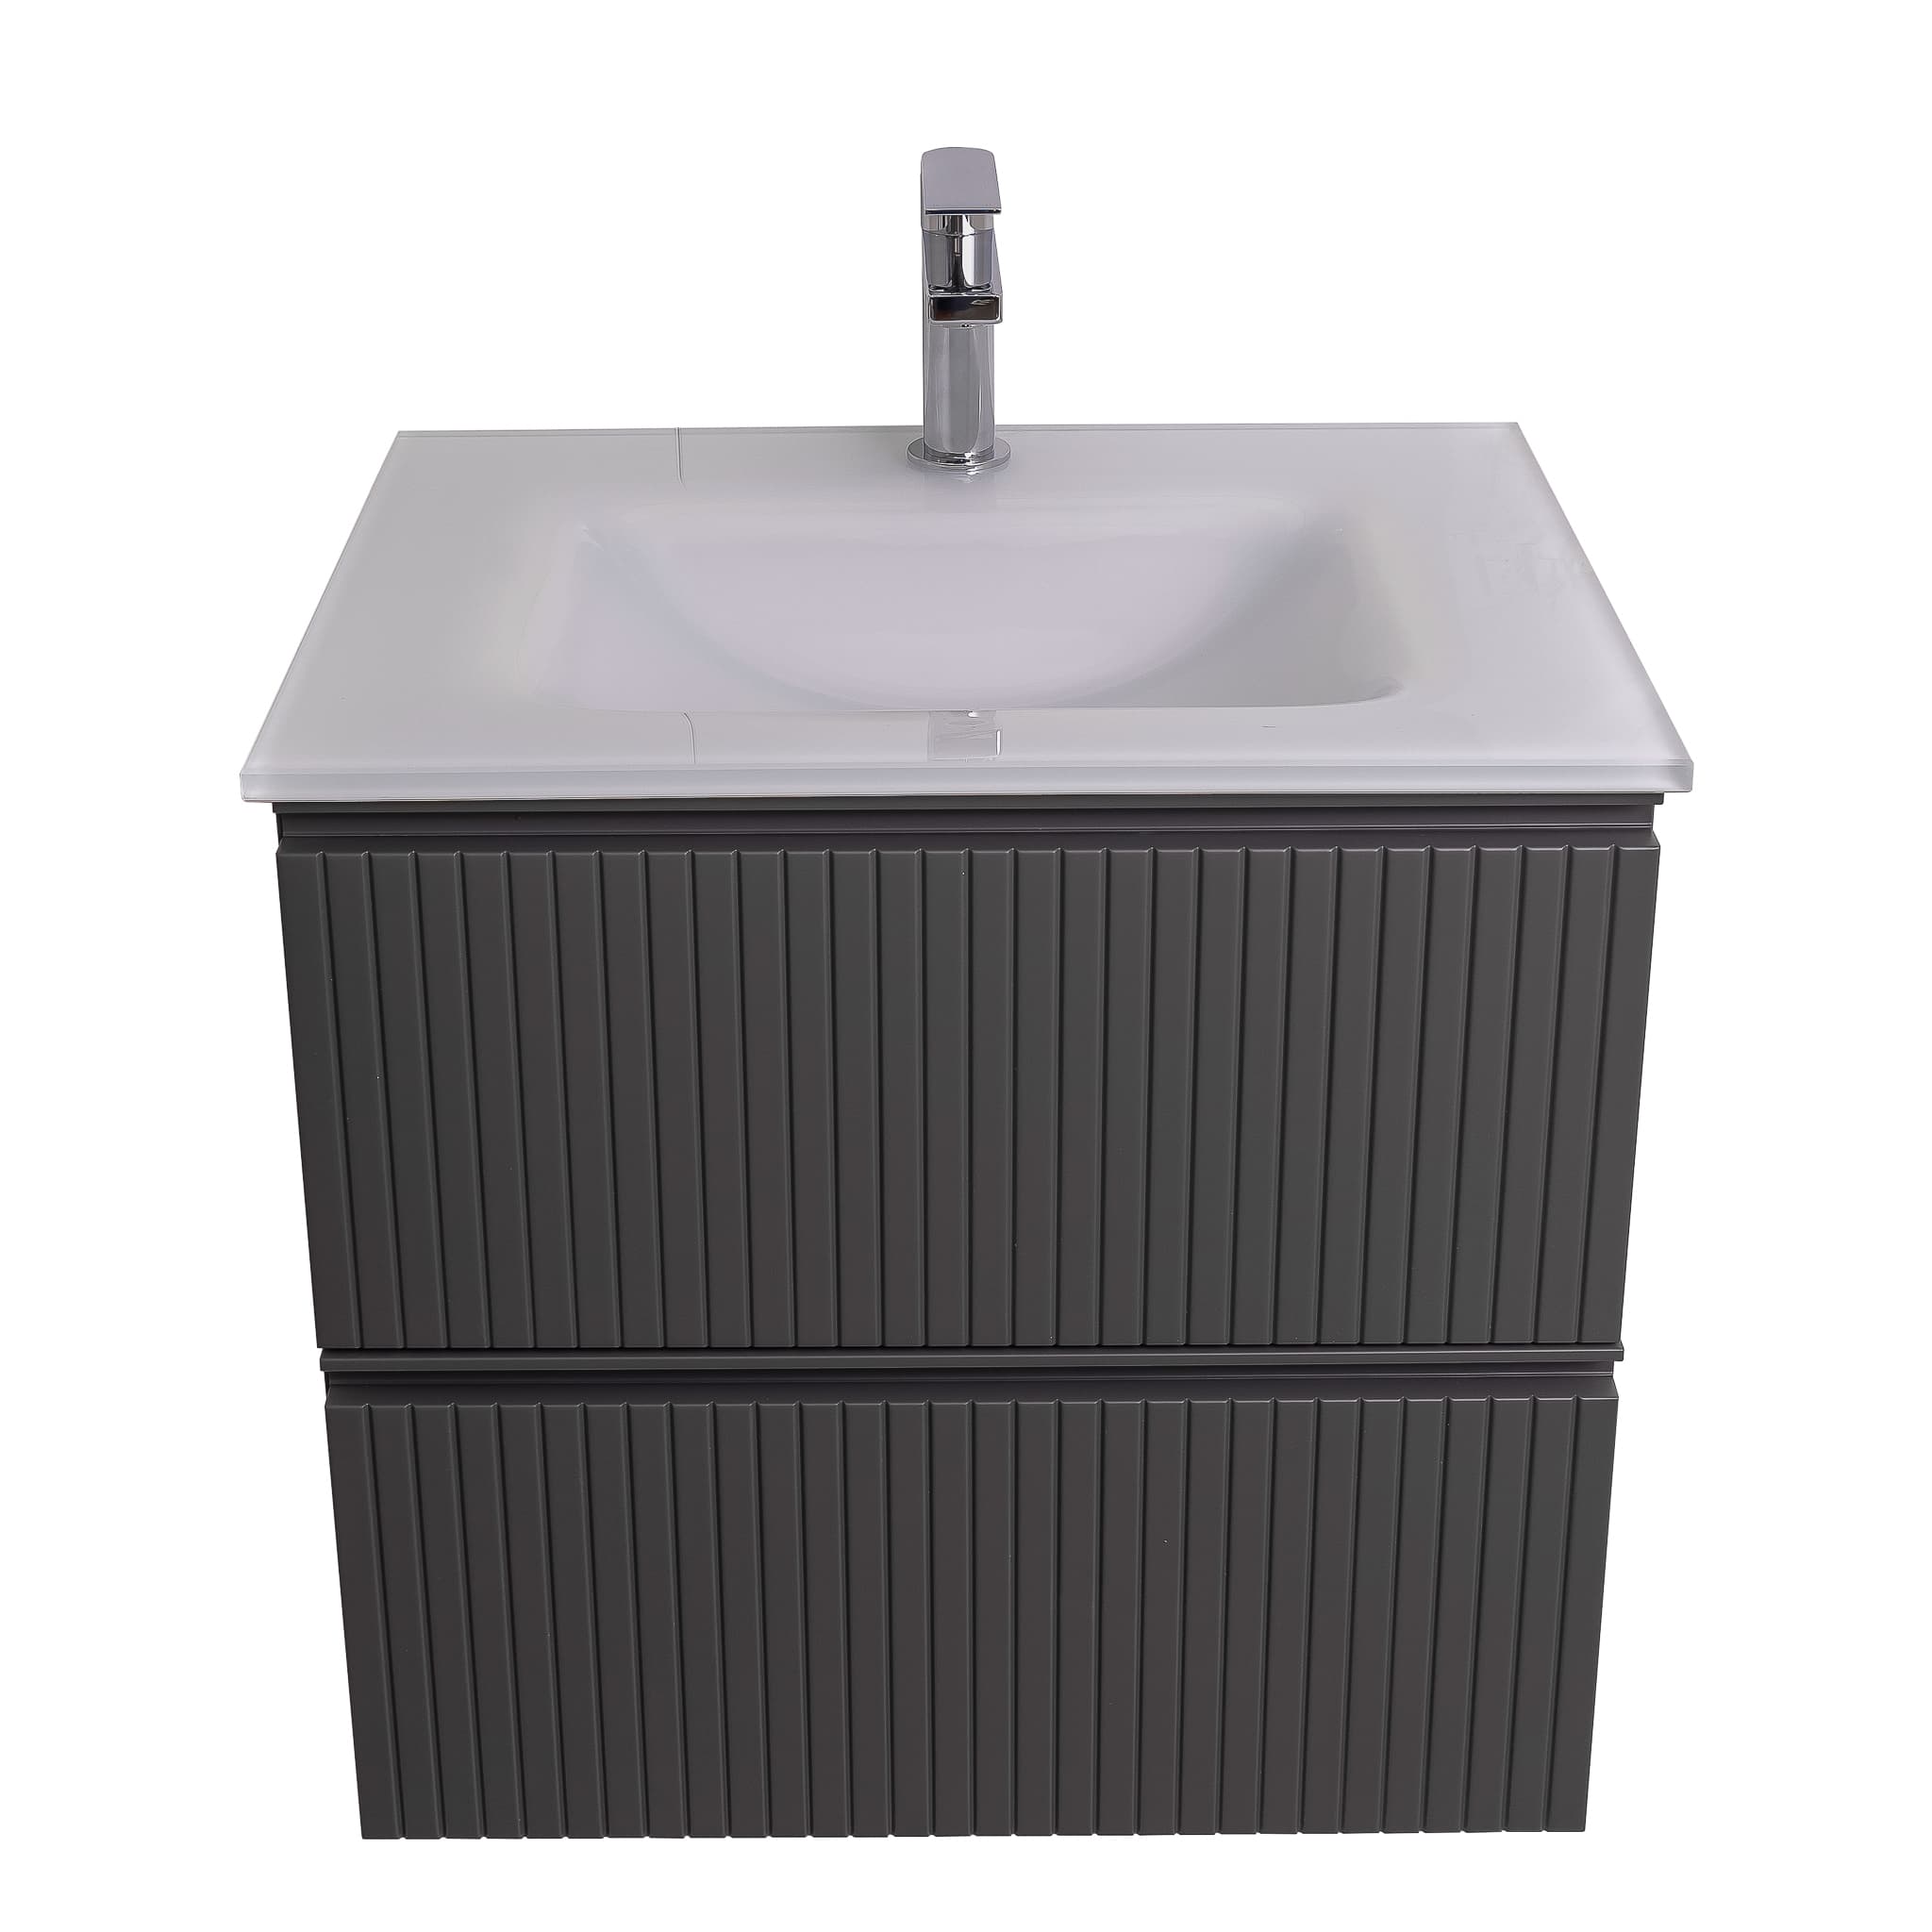 Ares 23.5 Matte Grey Cabinet, White Tempered Glass Sink, Wall Mounted Modern Vanity Set